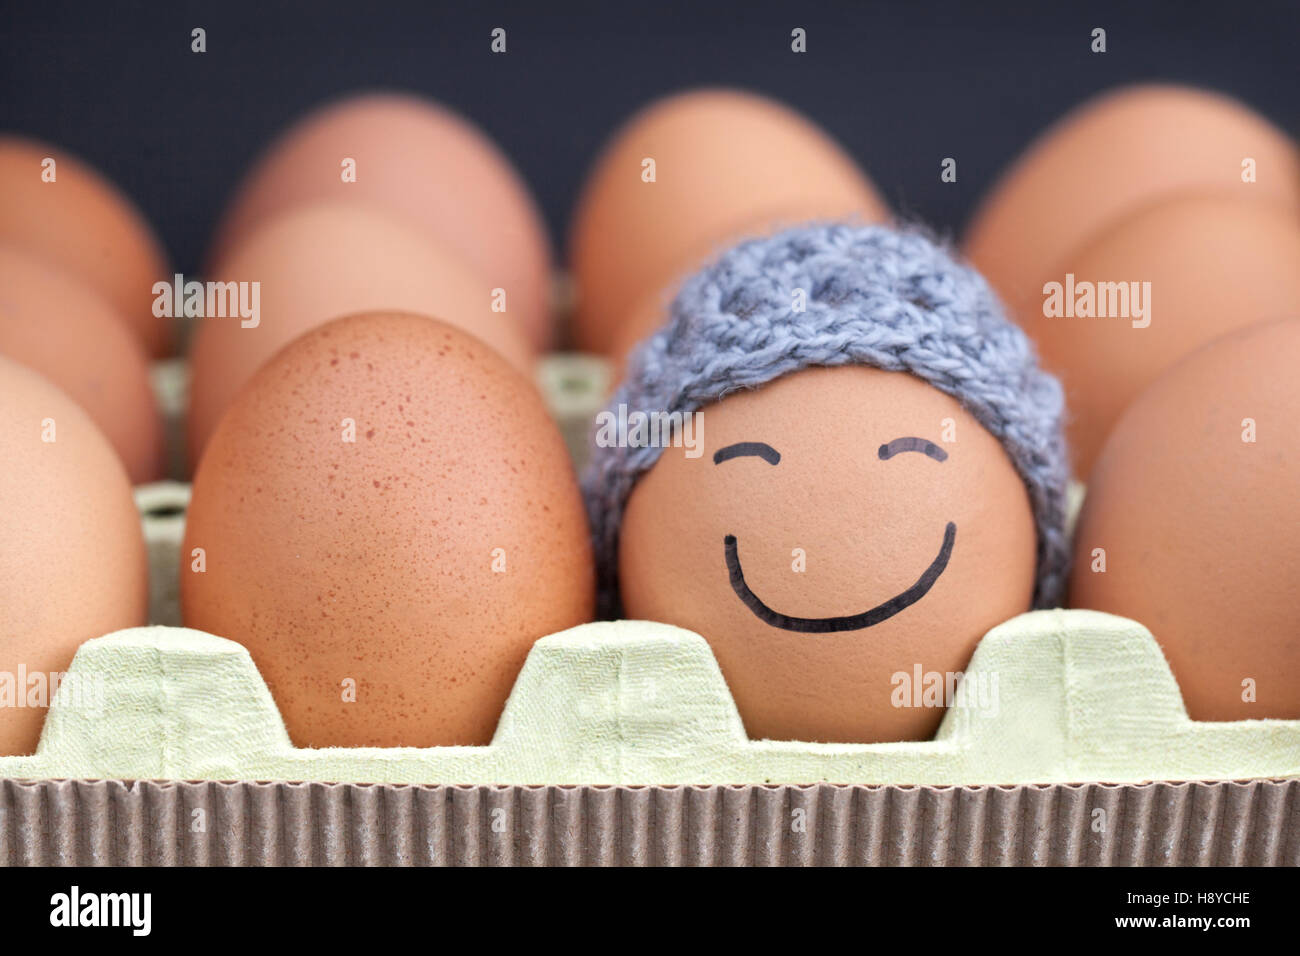 Smiling egg wearing a knitted hat souronded by blank brown eggs. Stock Photo